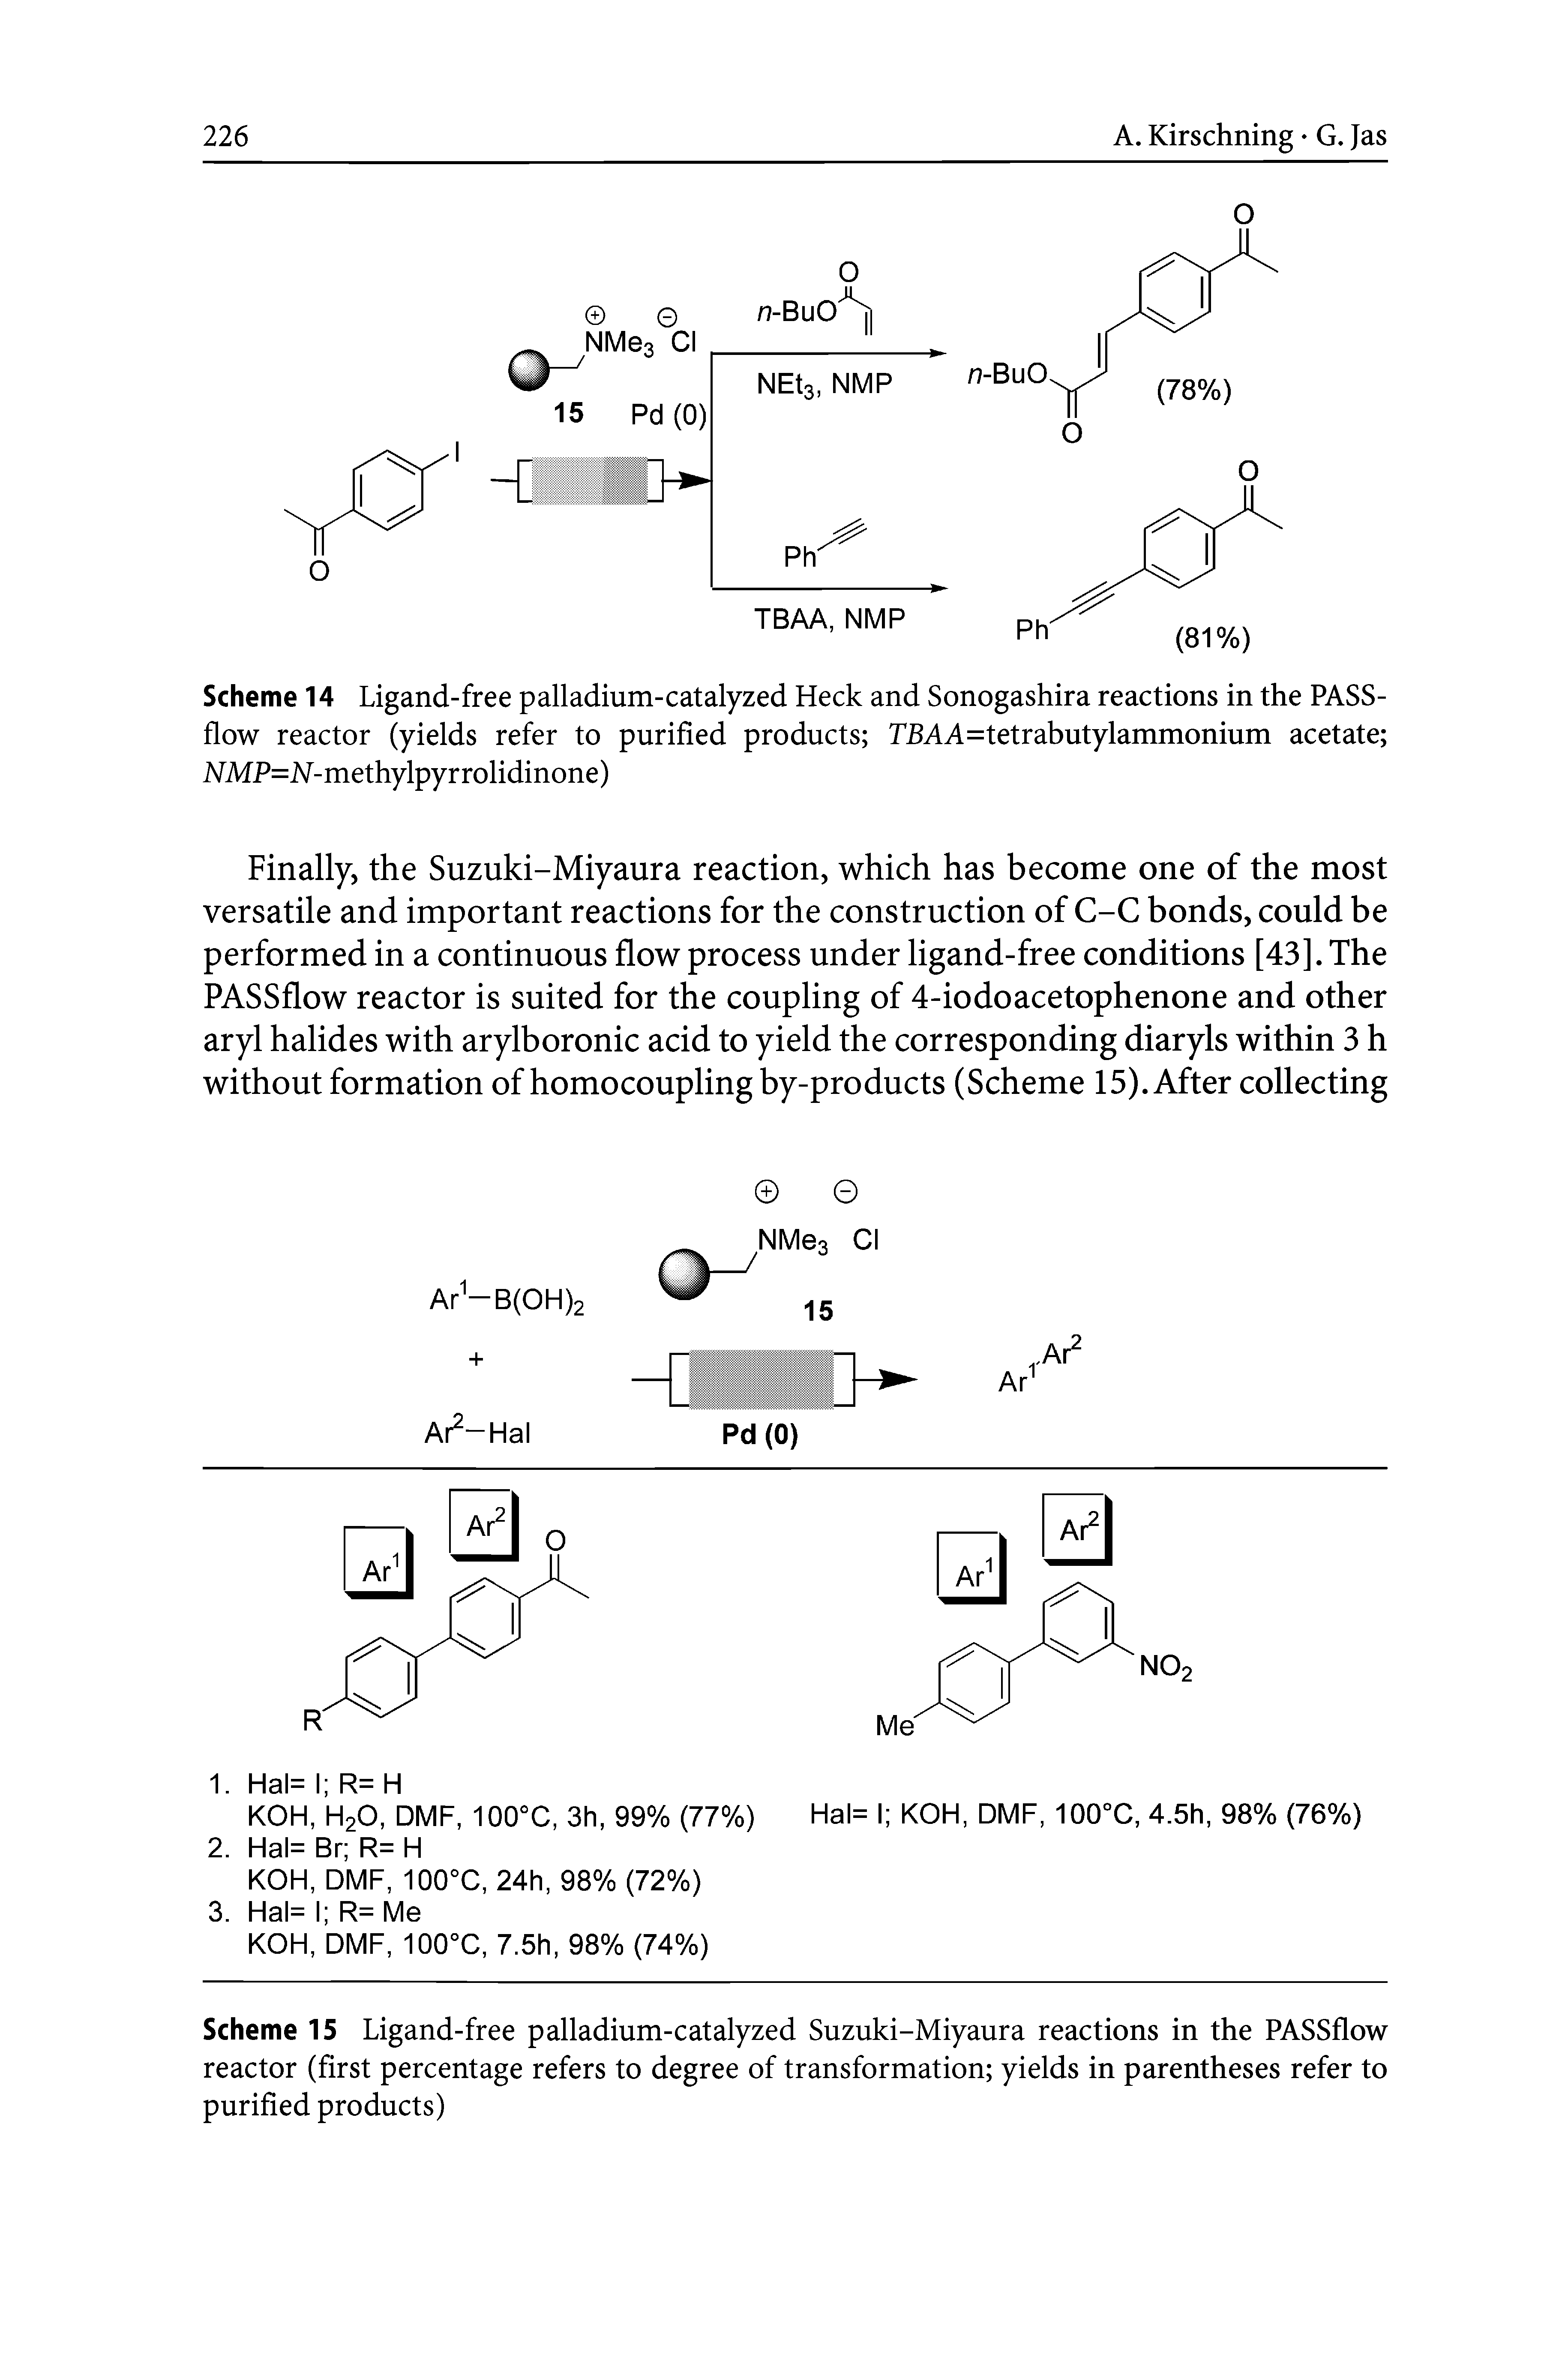 Scheme 15 Ligand-free palladium-catalyzed Suzuki-Miyaura reactions in the PASSflow reactor (first percentage refers to degree of transformation yields in parentheses refer to purified products)...